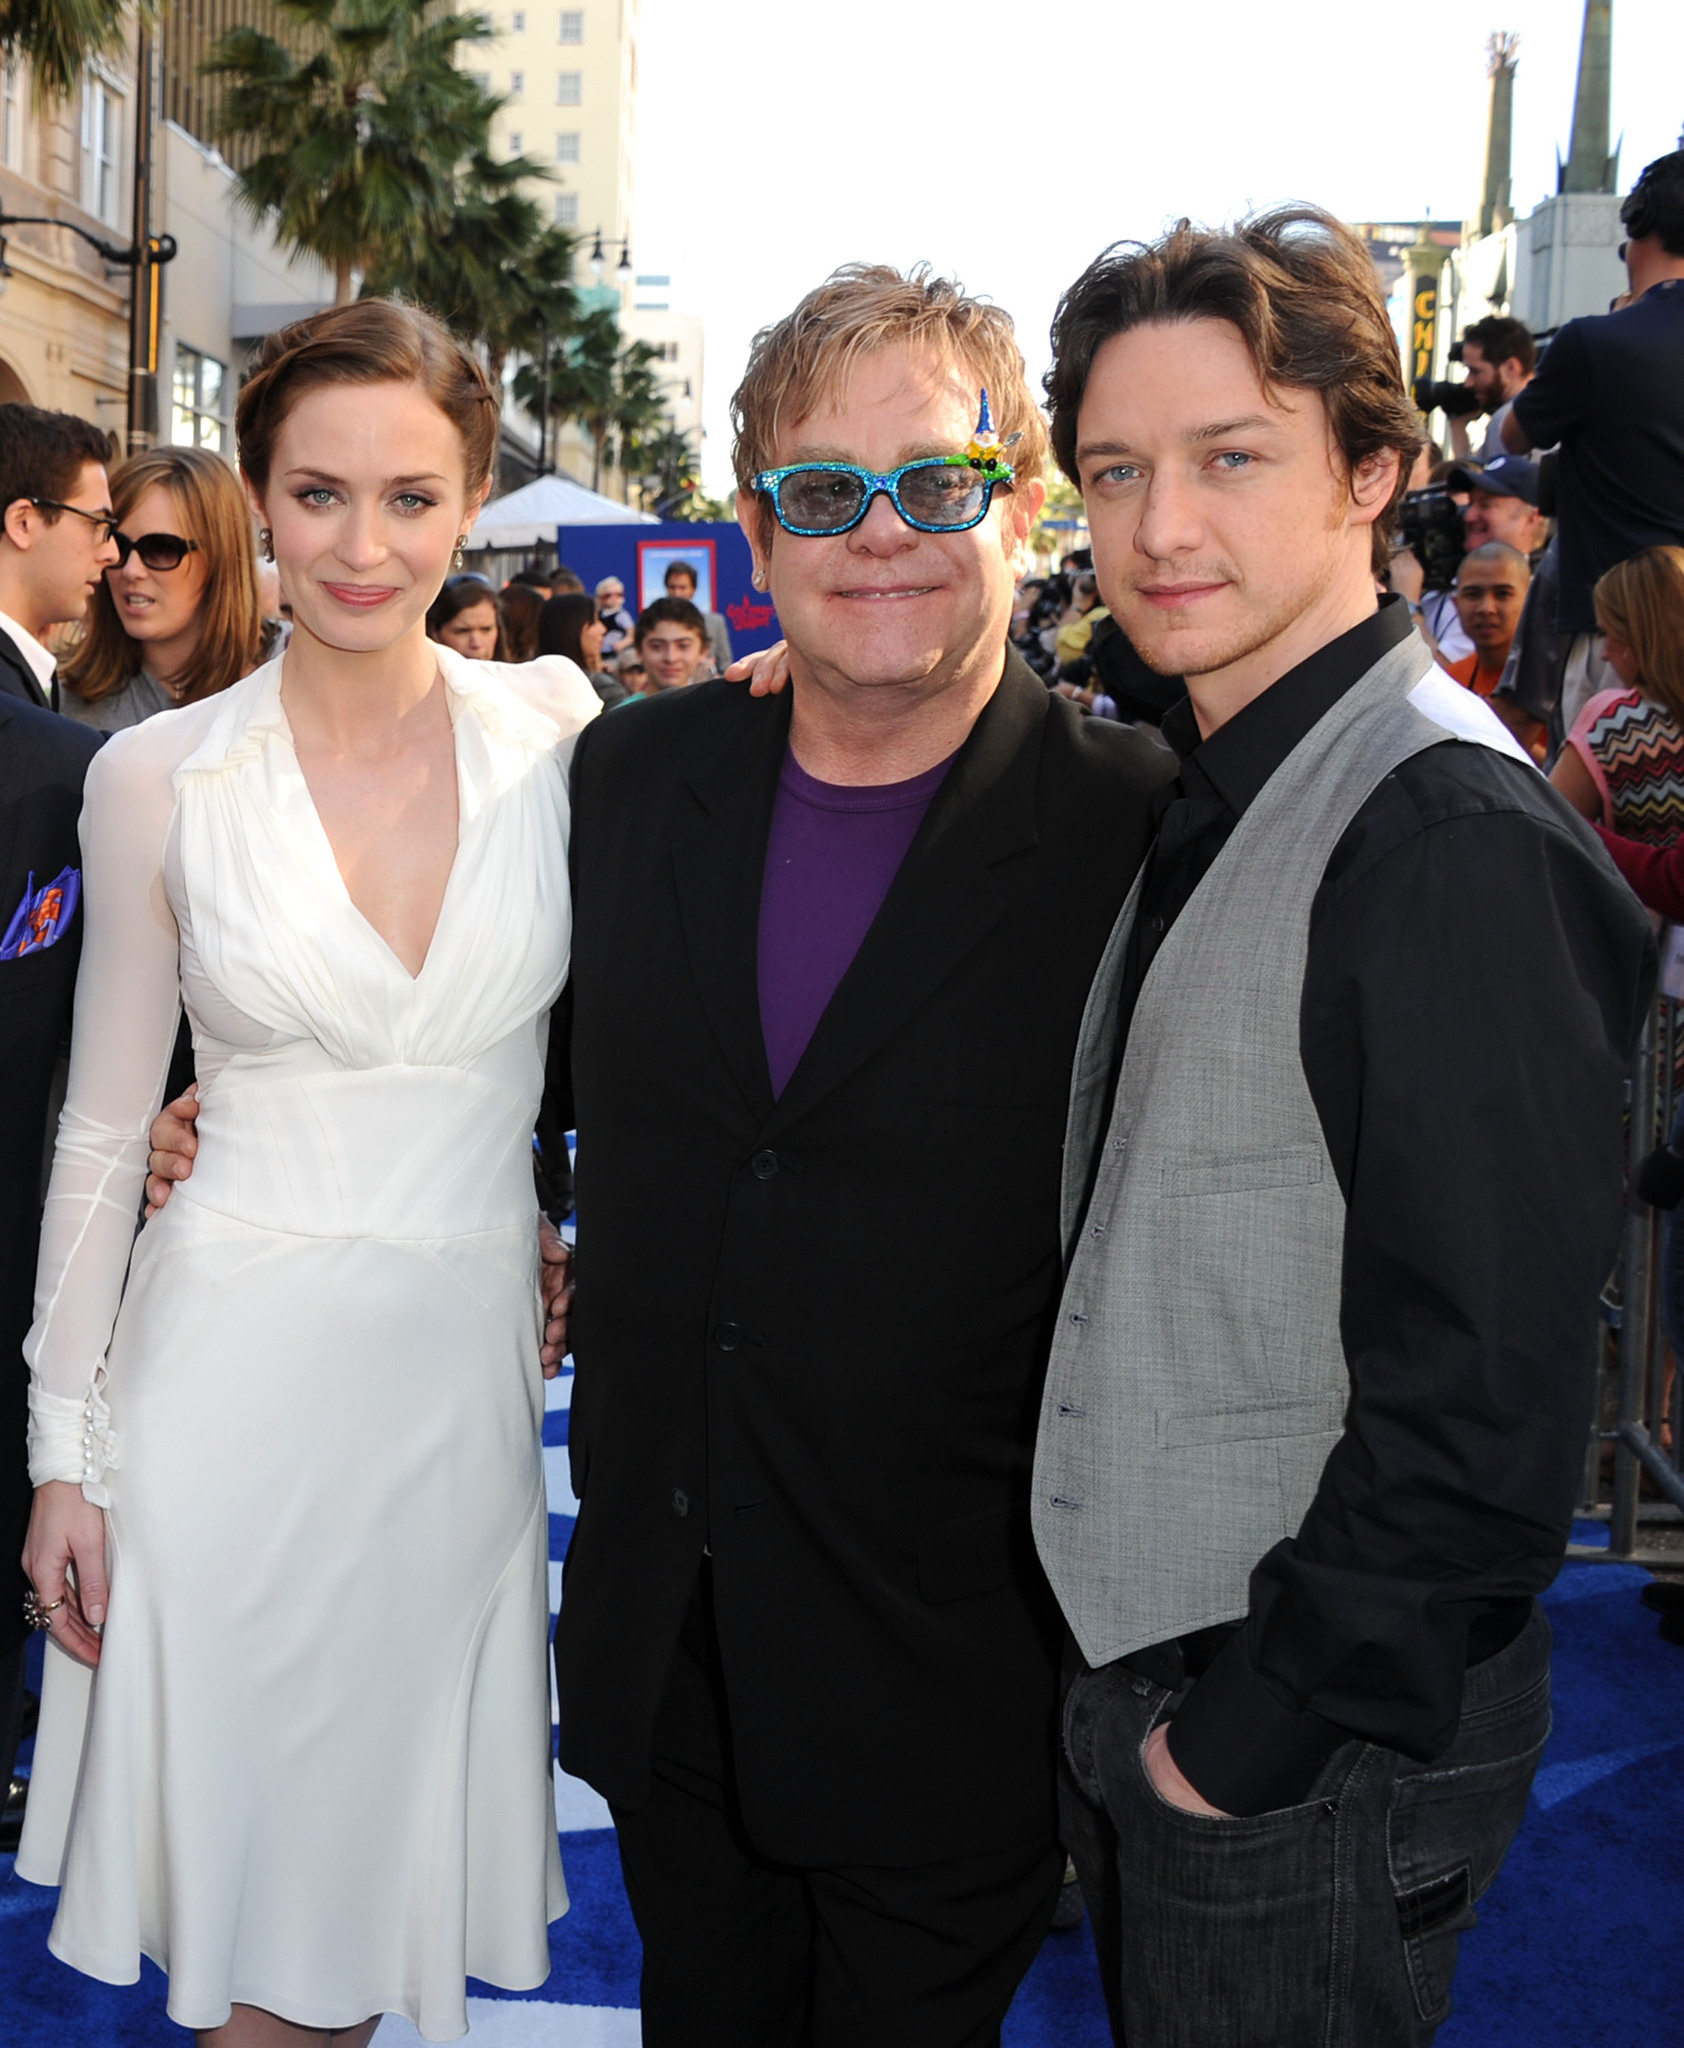 Elton John, James McAvoy and Emily Blunt at event of Gnomeo & Juliet (2011)